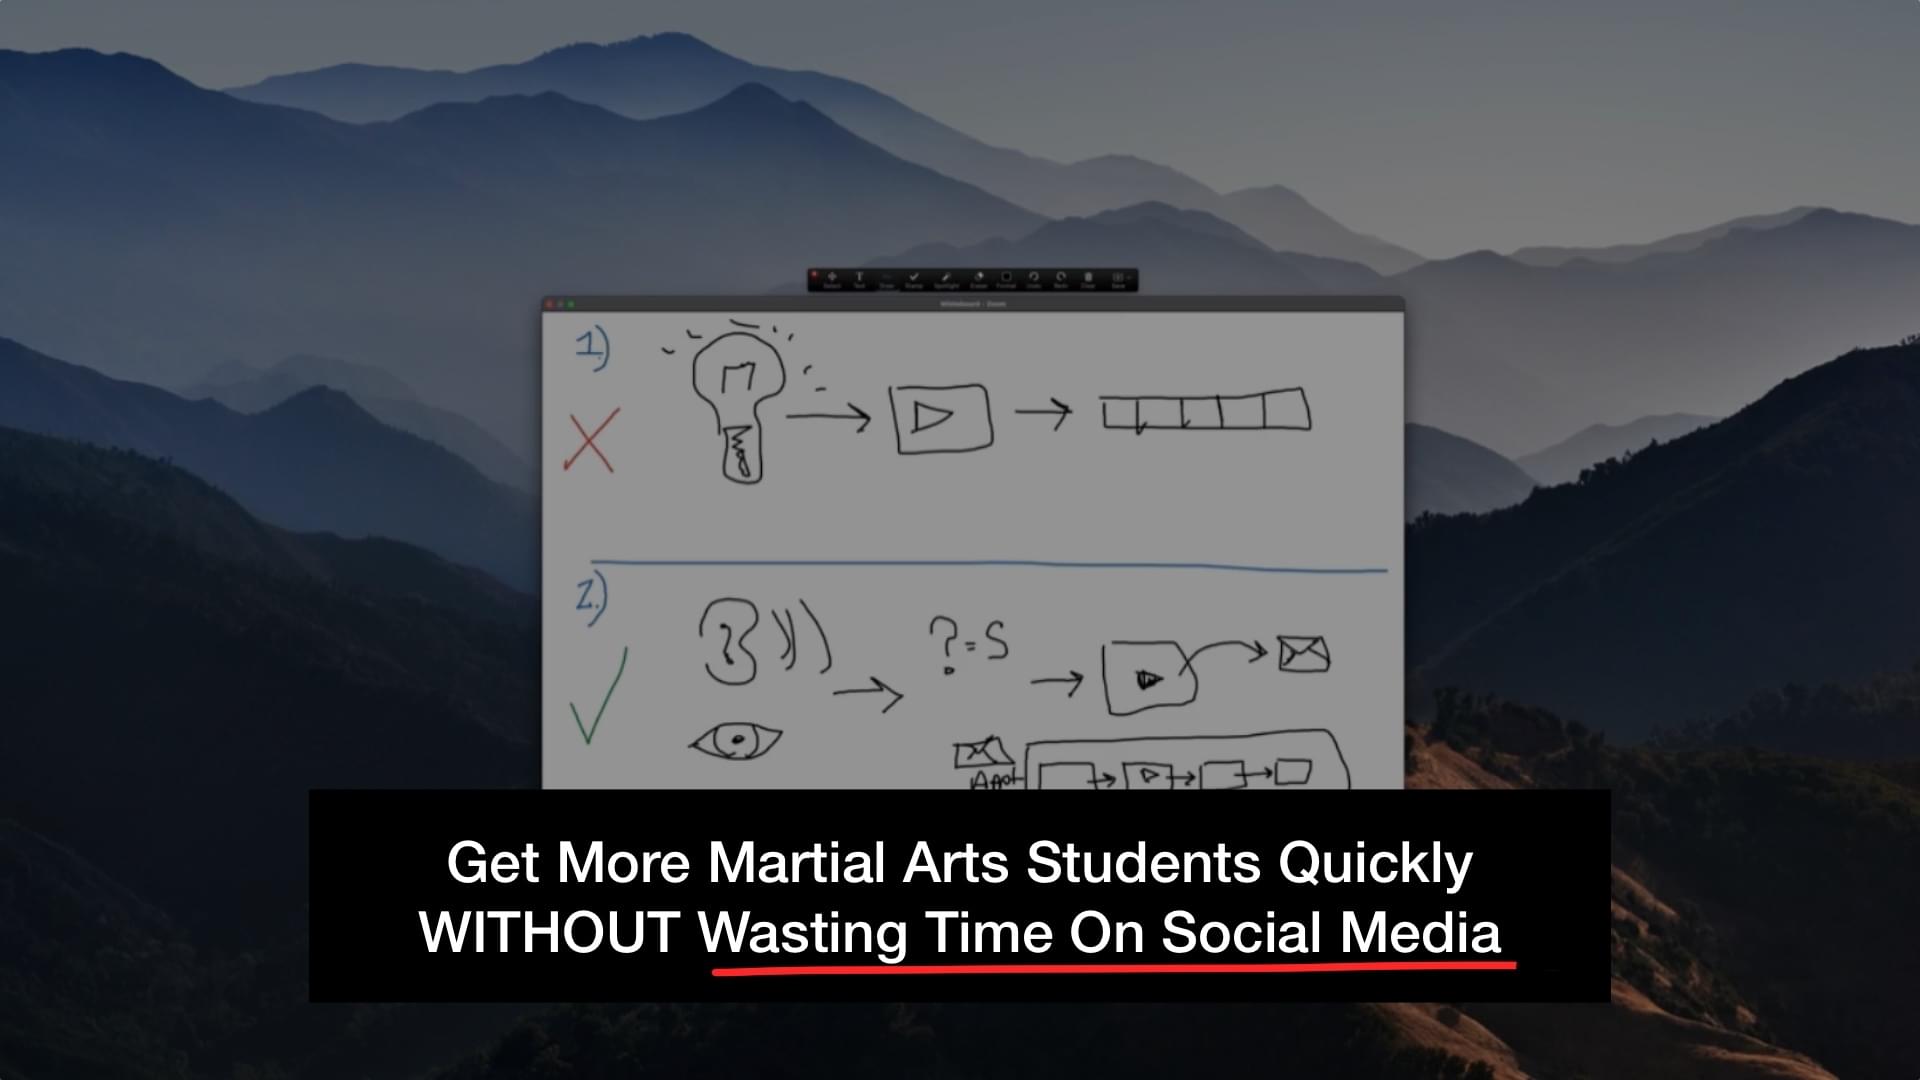 Get More Martial Arts Students Quickly WITHOUT Wasting Time On Social Media